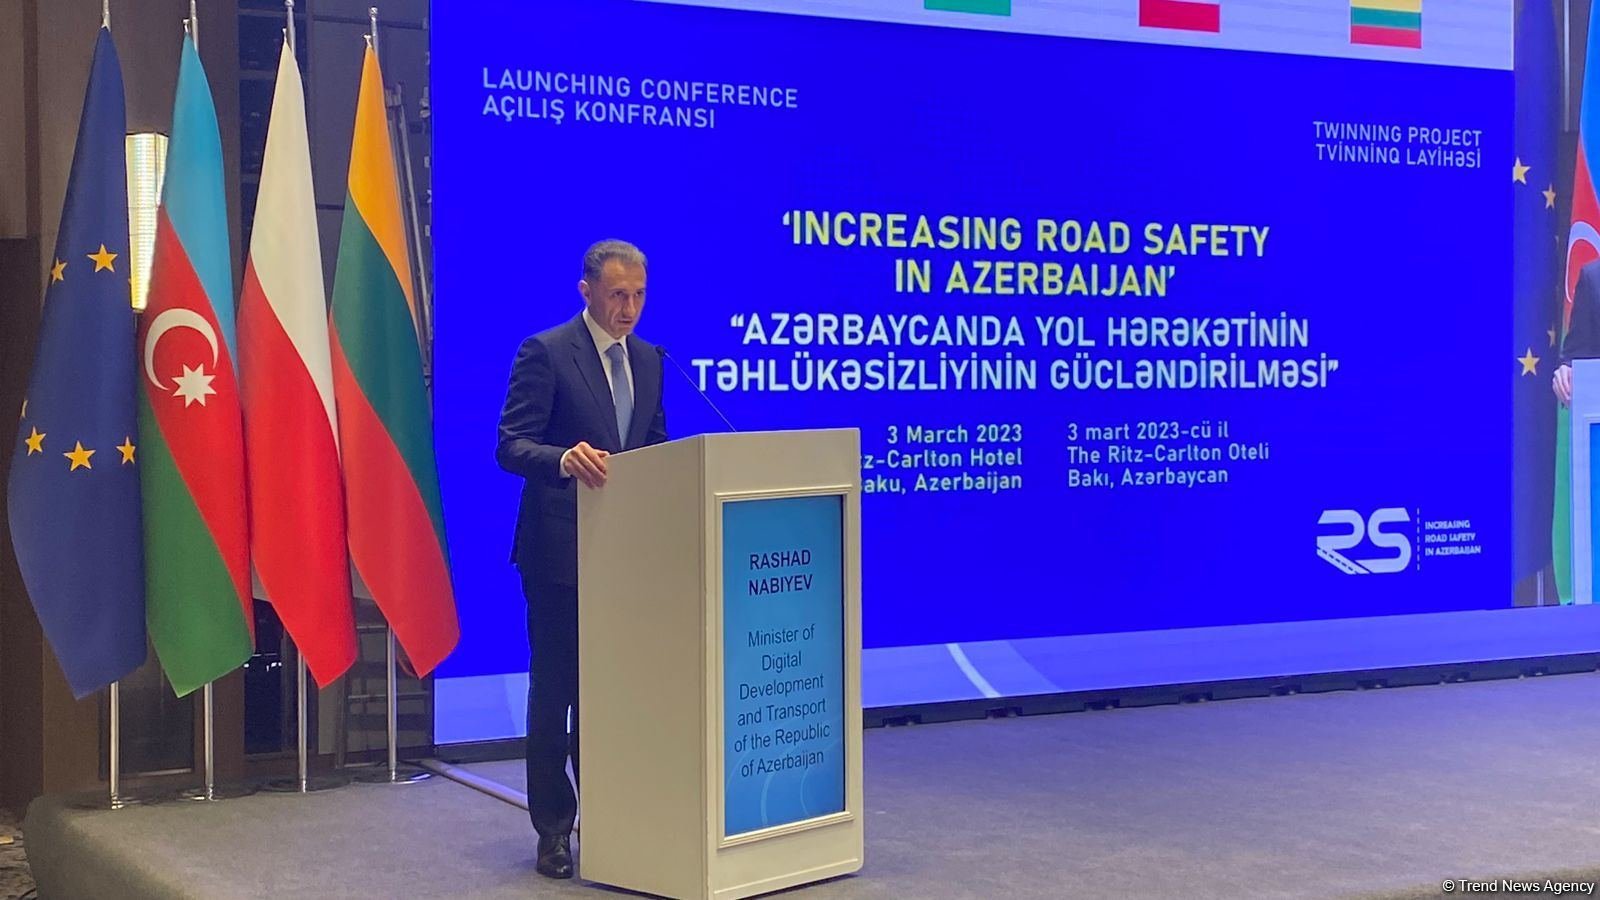 Azerbaijan to work on improving its road safety with help of Poland, Latvia